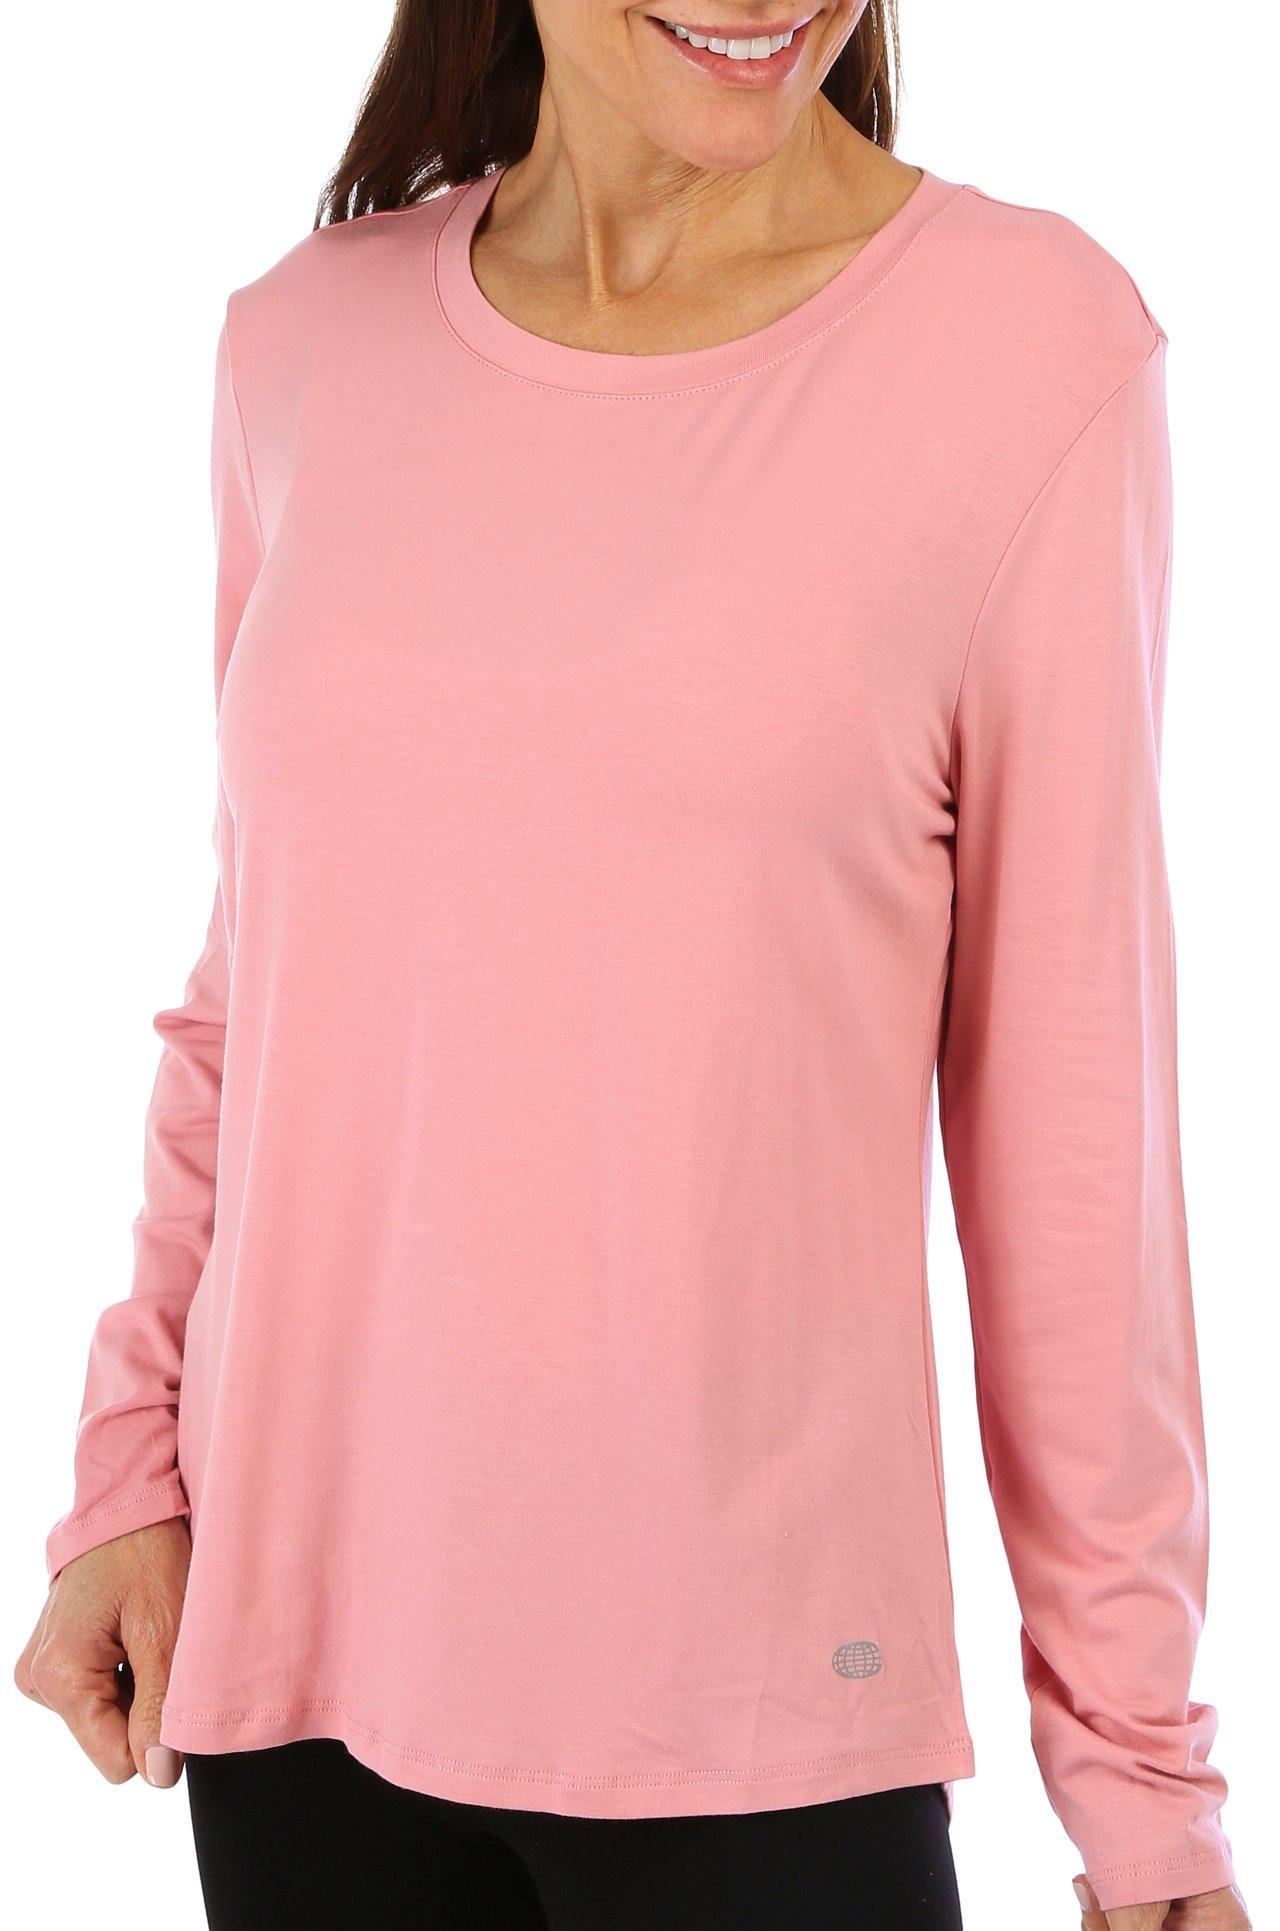 Reel Legends Womens UPF 50 Solid Long Sleeve Top - Blush Pink - Large